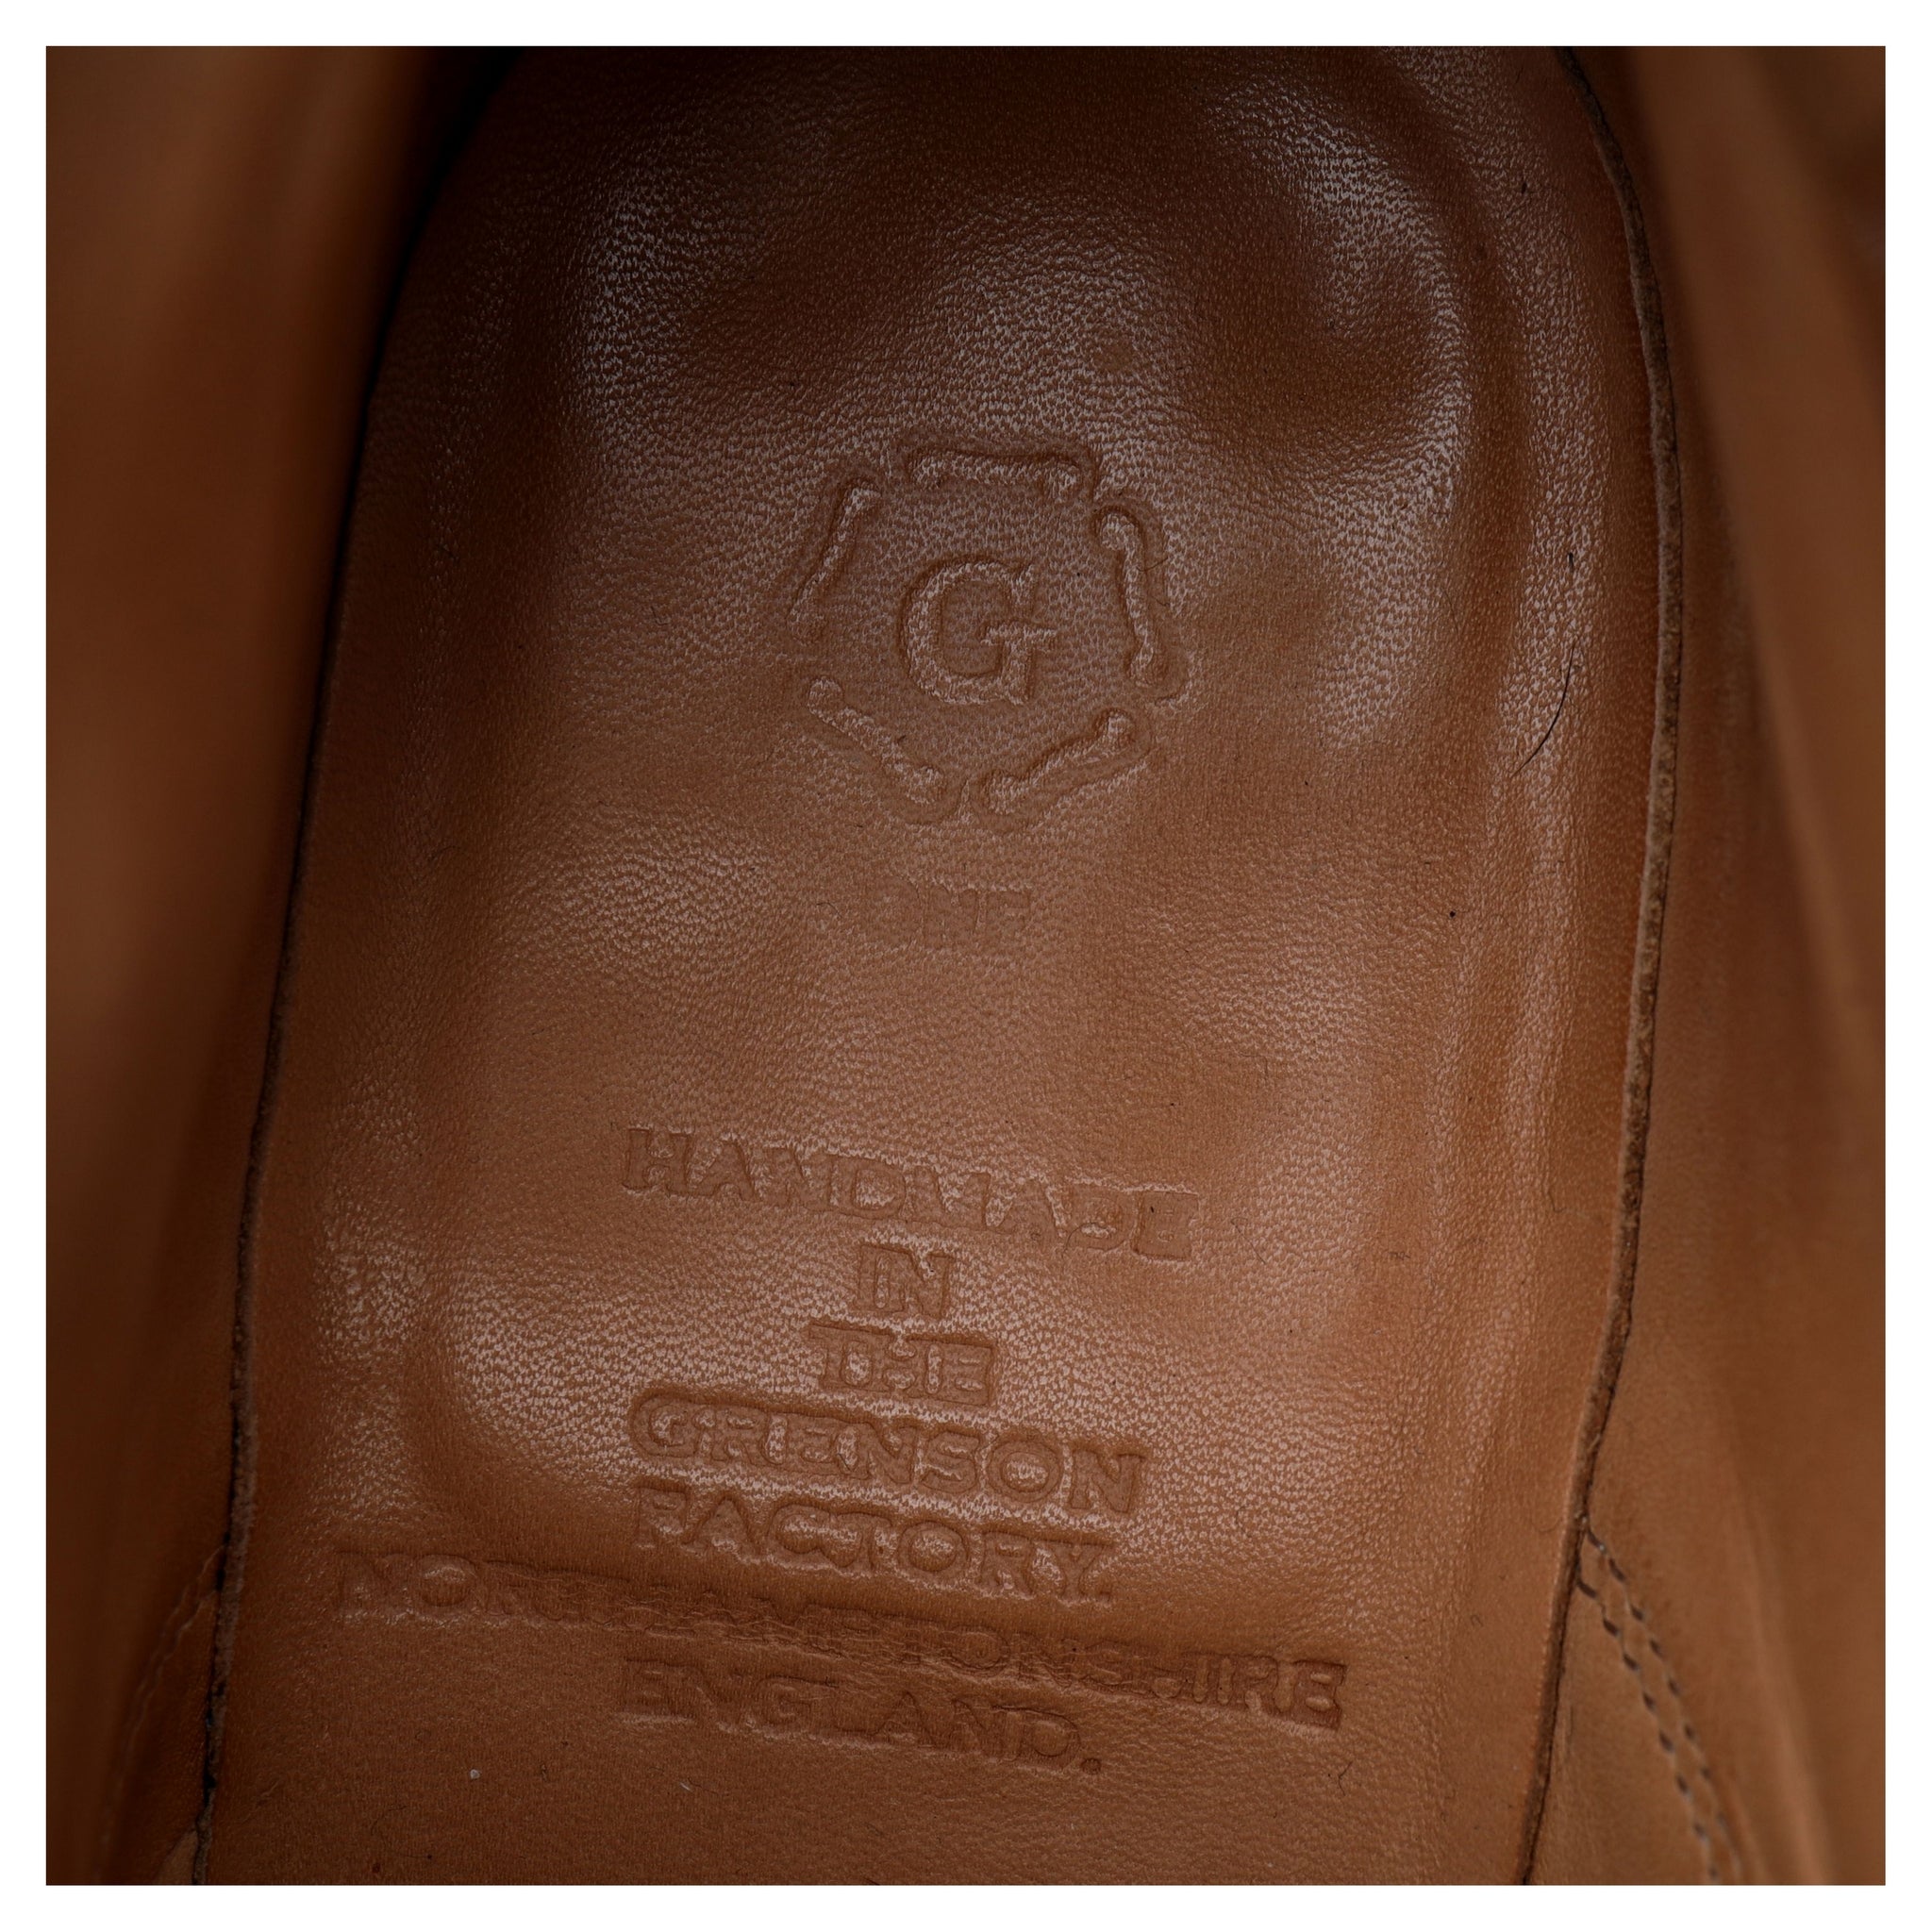 Grenson Leather Duck Boots - DeeCee style